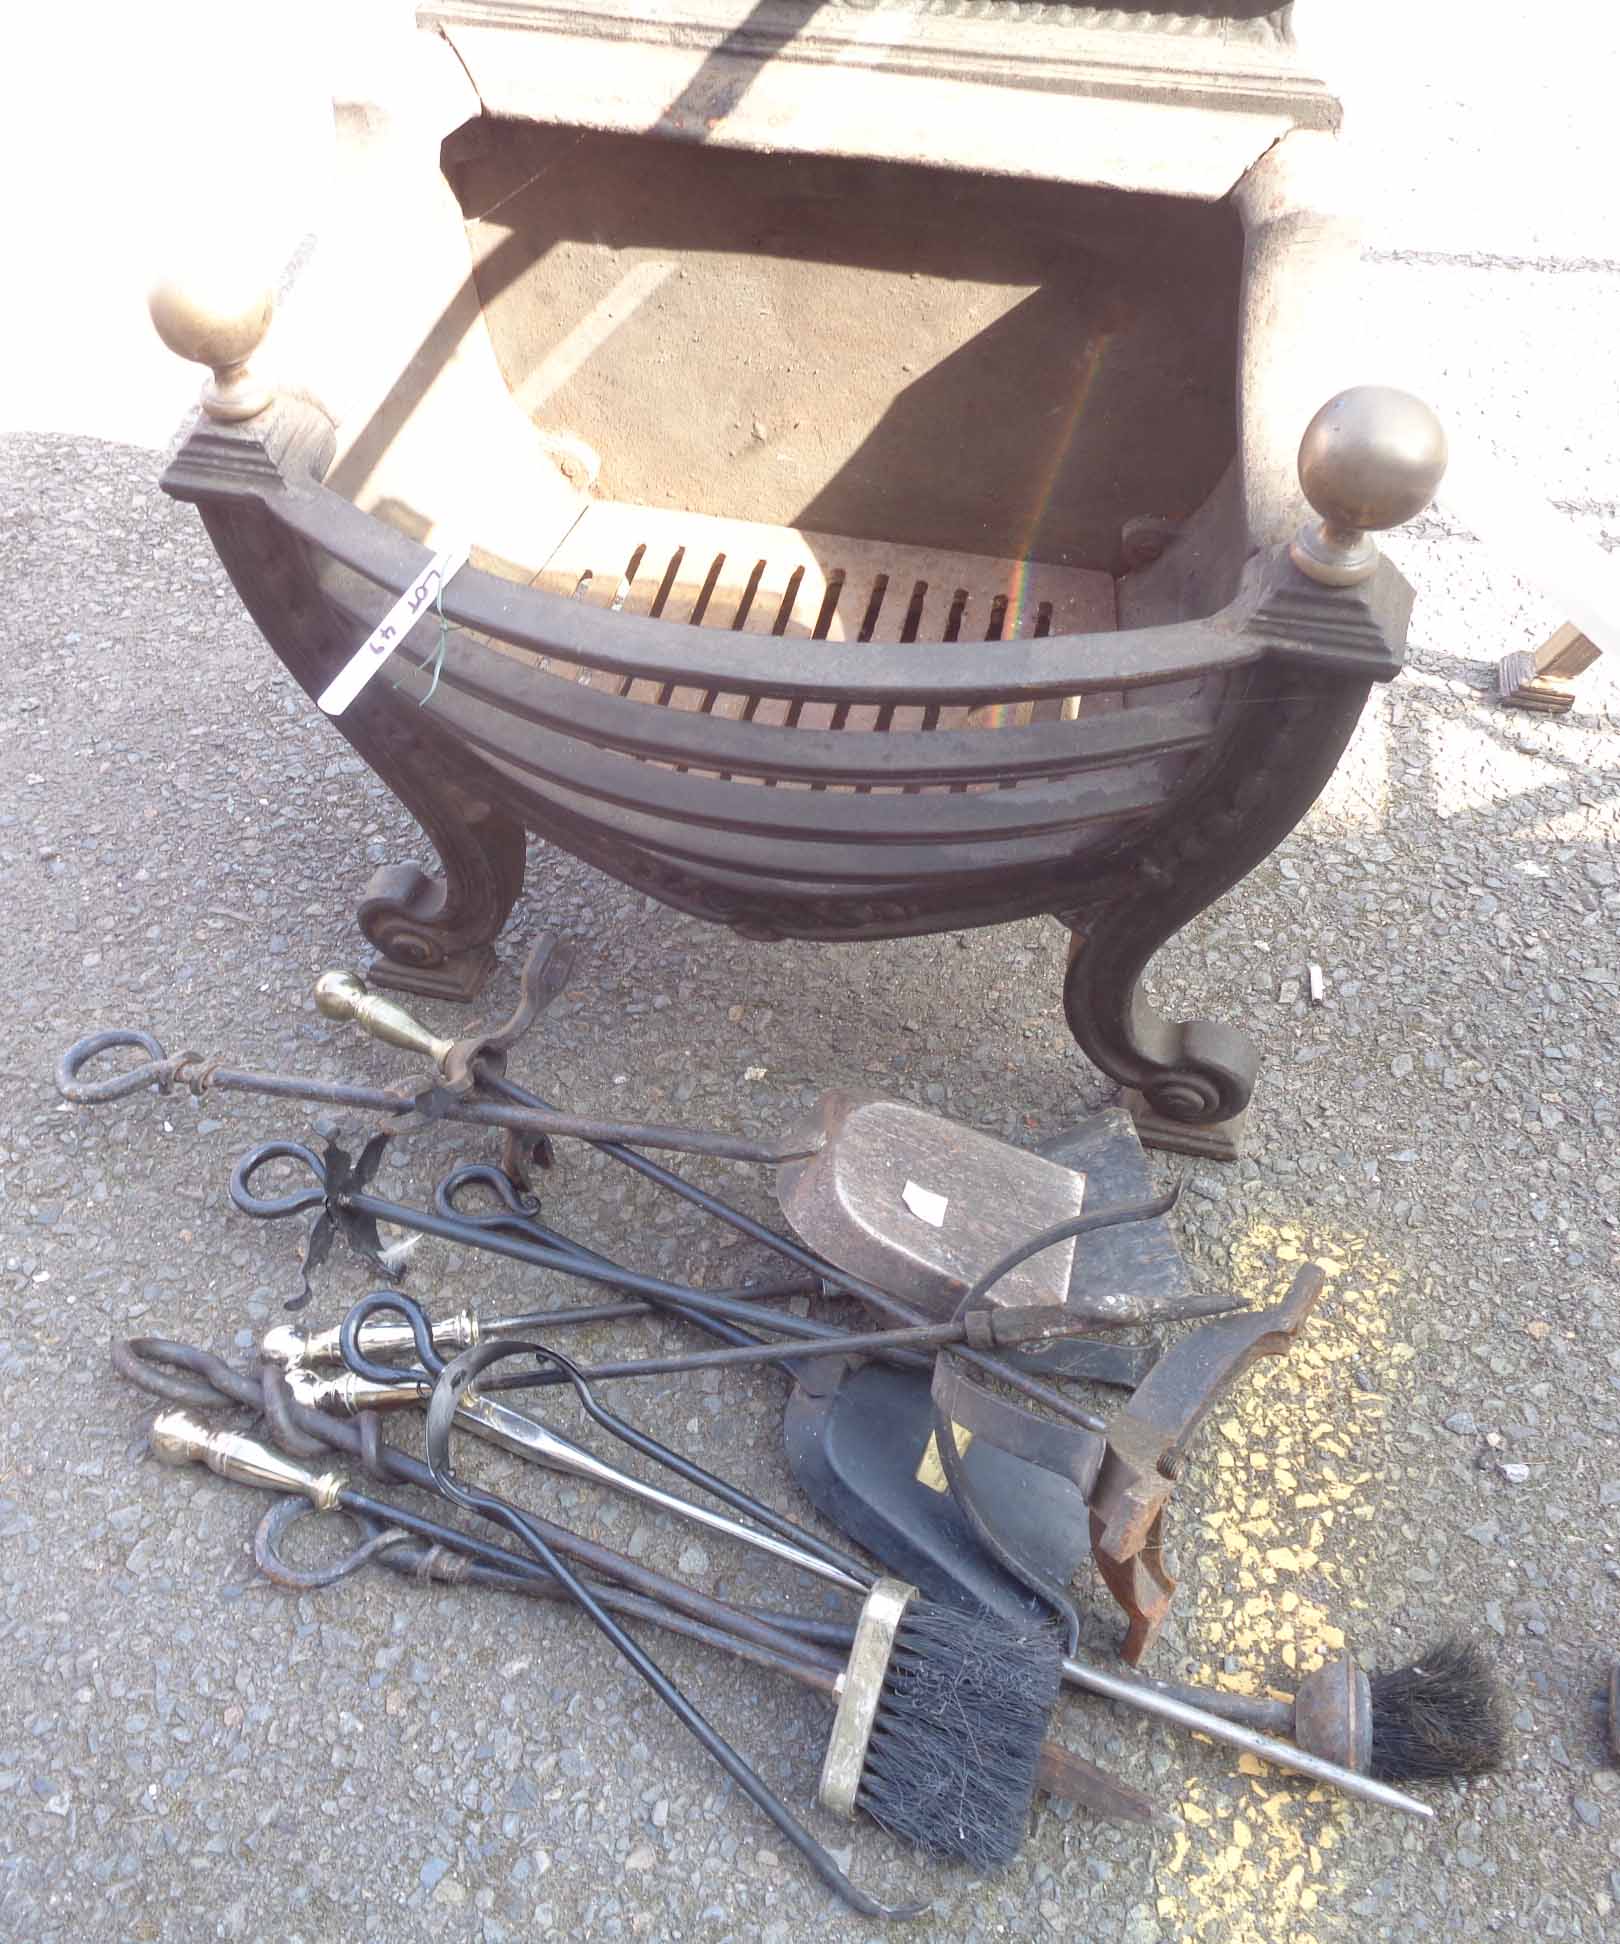 A large cast iron fire grate with brass finials, and various fire tools